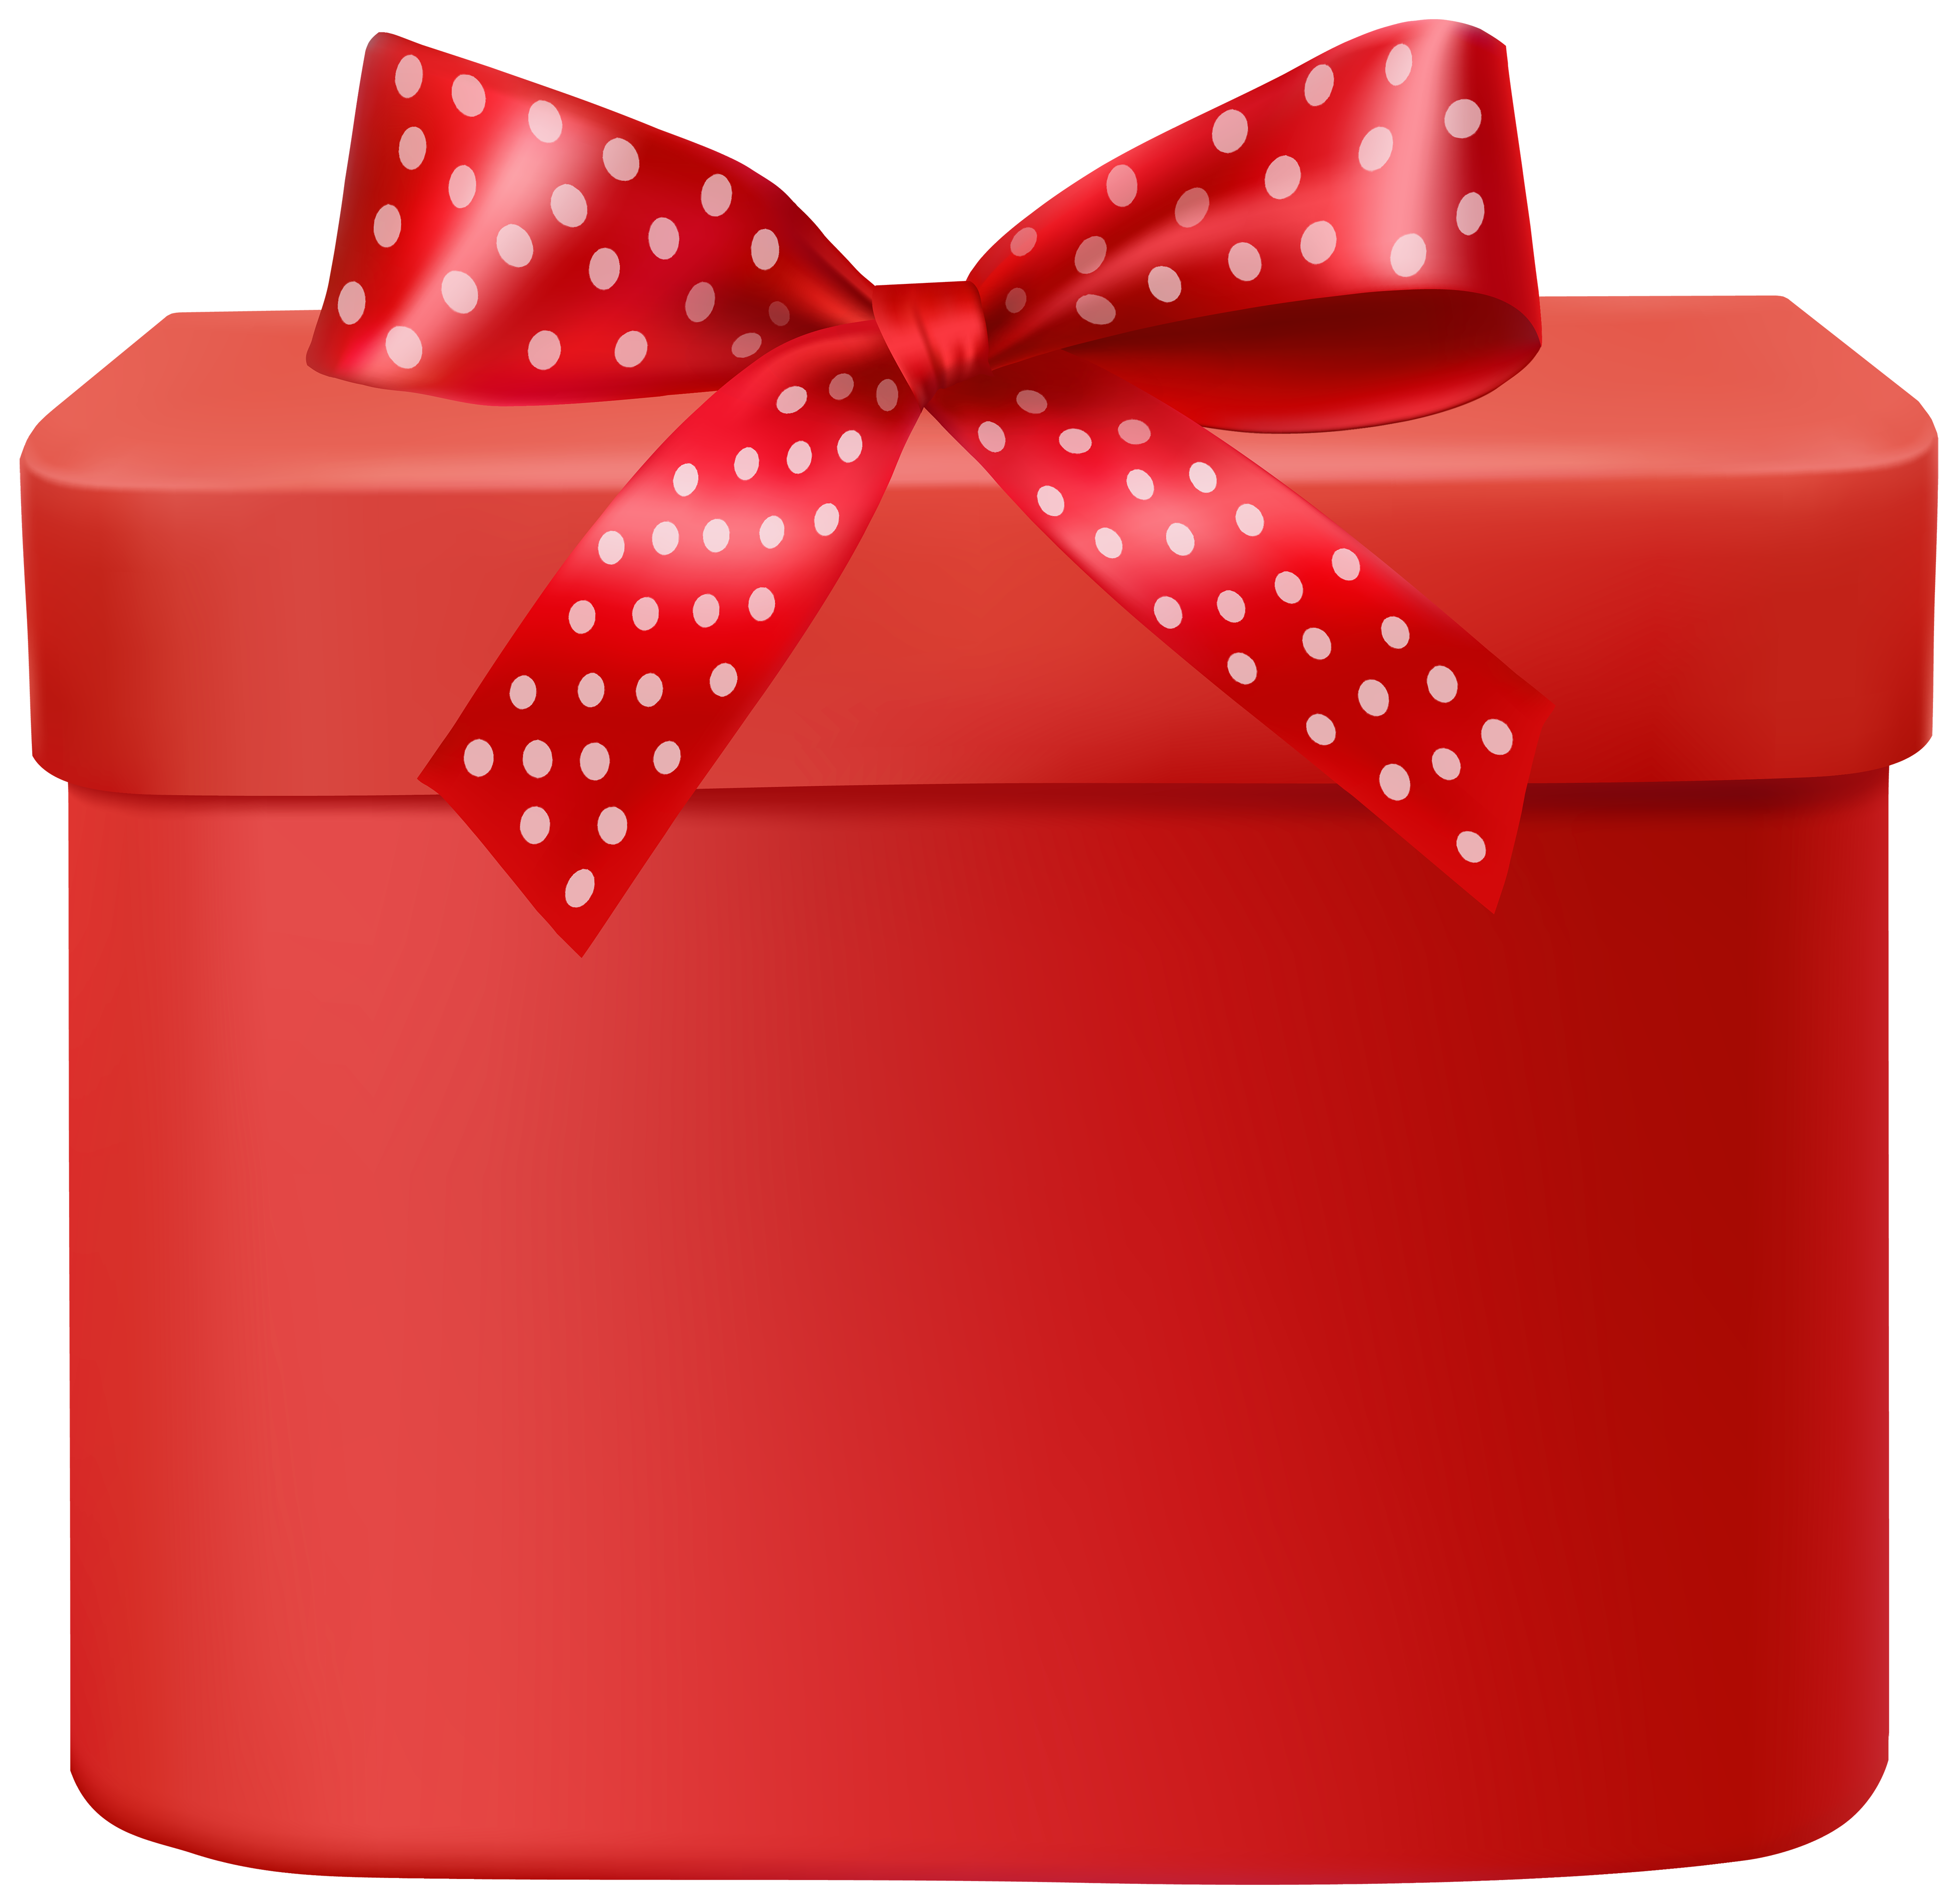 gift clipart cylinder